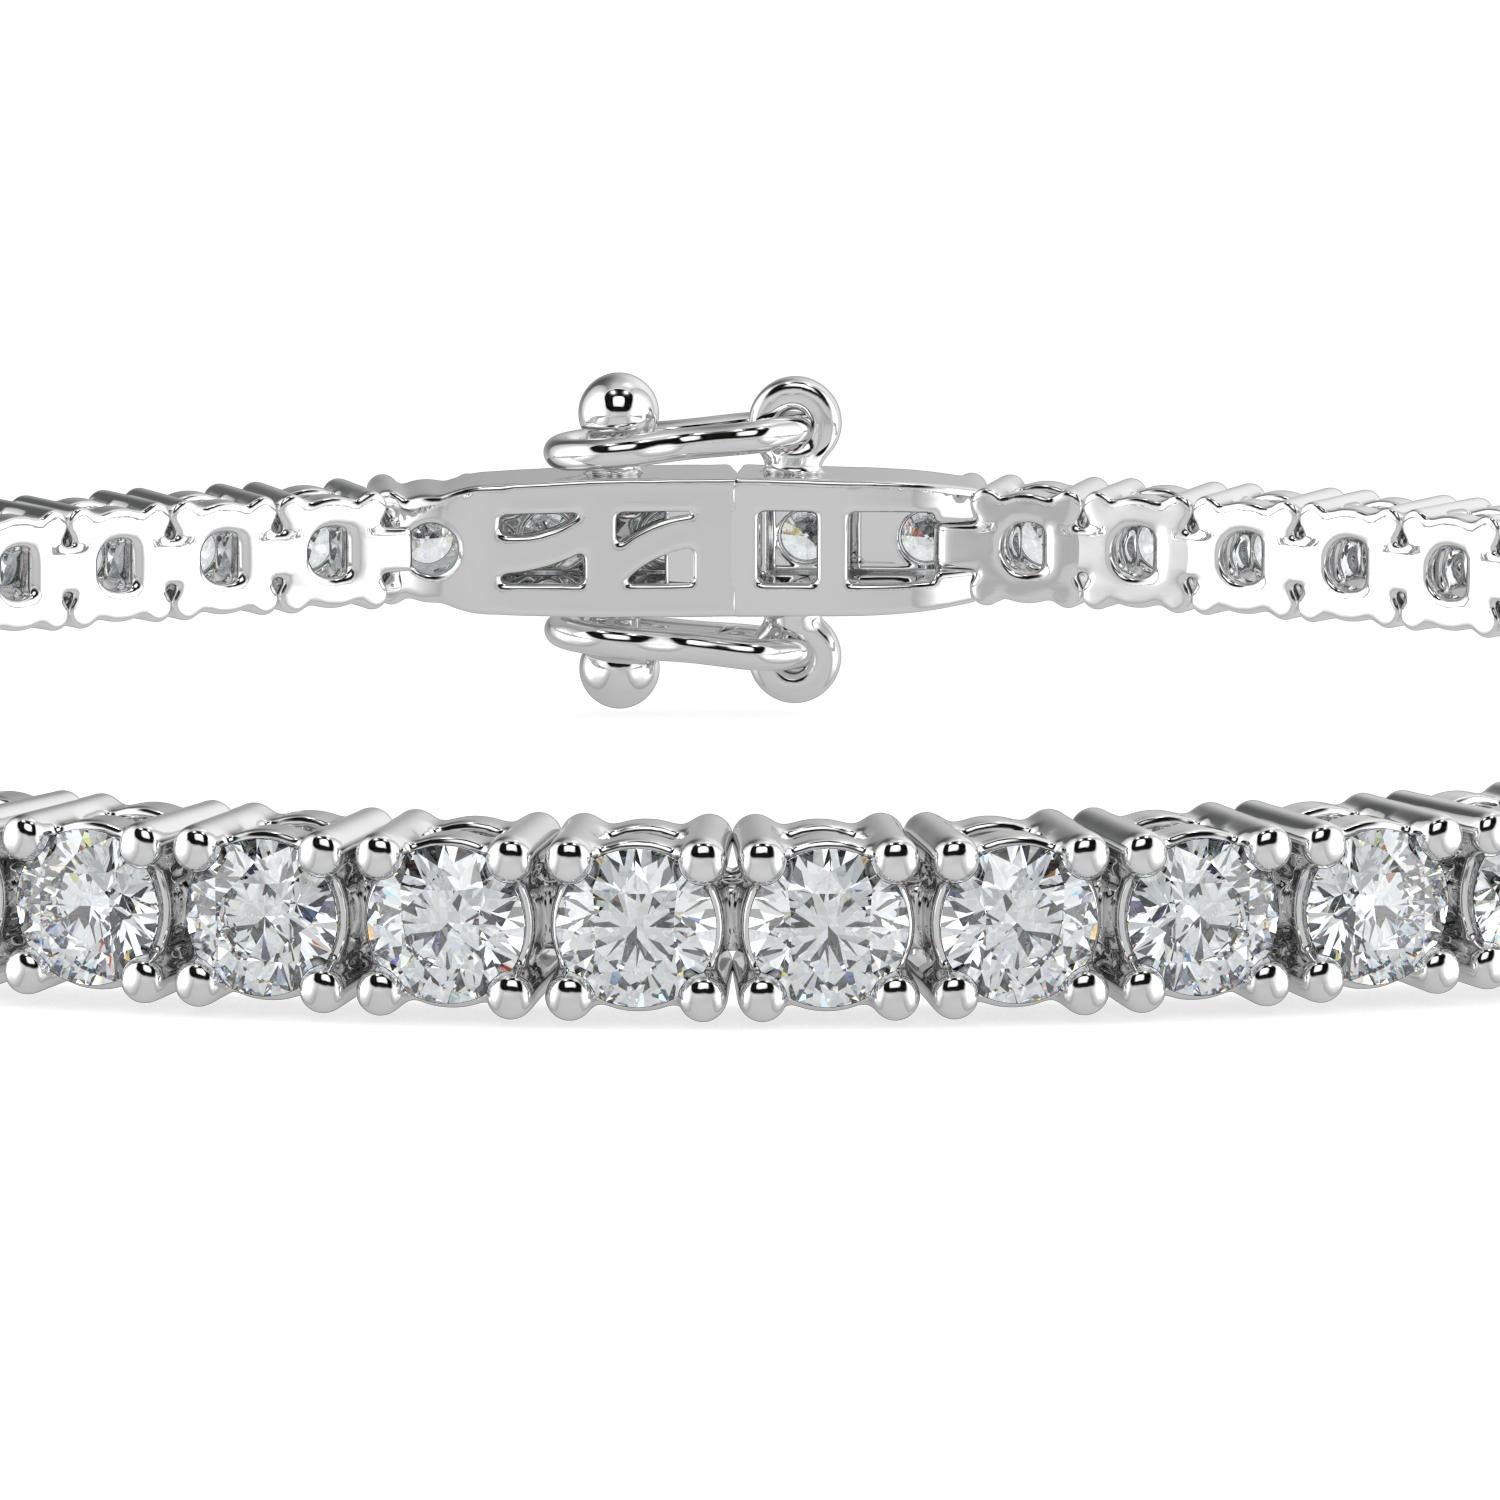 8.00 Carat Round Cut GH-I1 Natural Diamond Classic Tennis Bracelet 4 Prong 14K White Gold for Women

Specification
Brand: AAMIAA
Length: 7 Inches 
Color: GH
Carat Weight:8CTW
Clarity: I1

LUXURIOUS AND LASTING- Our bracelets are a luxurious and